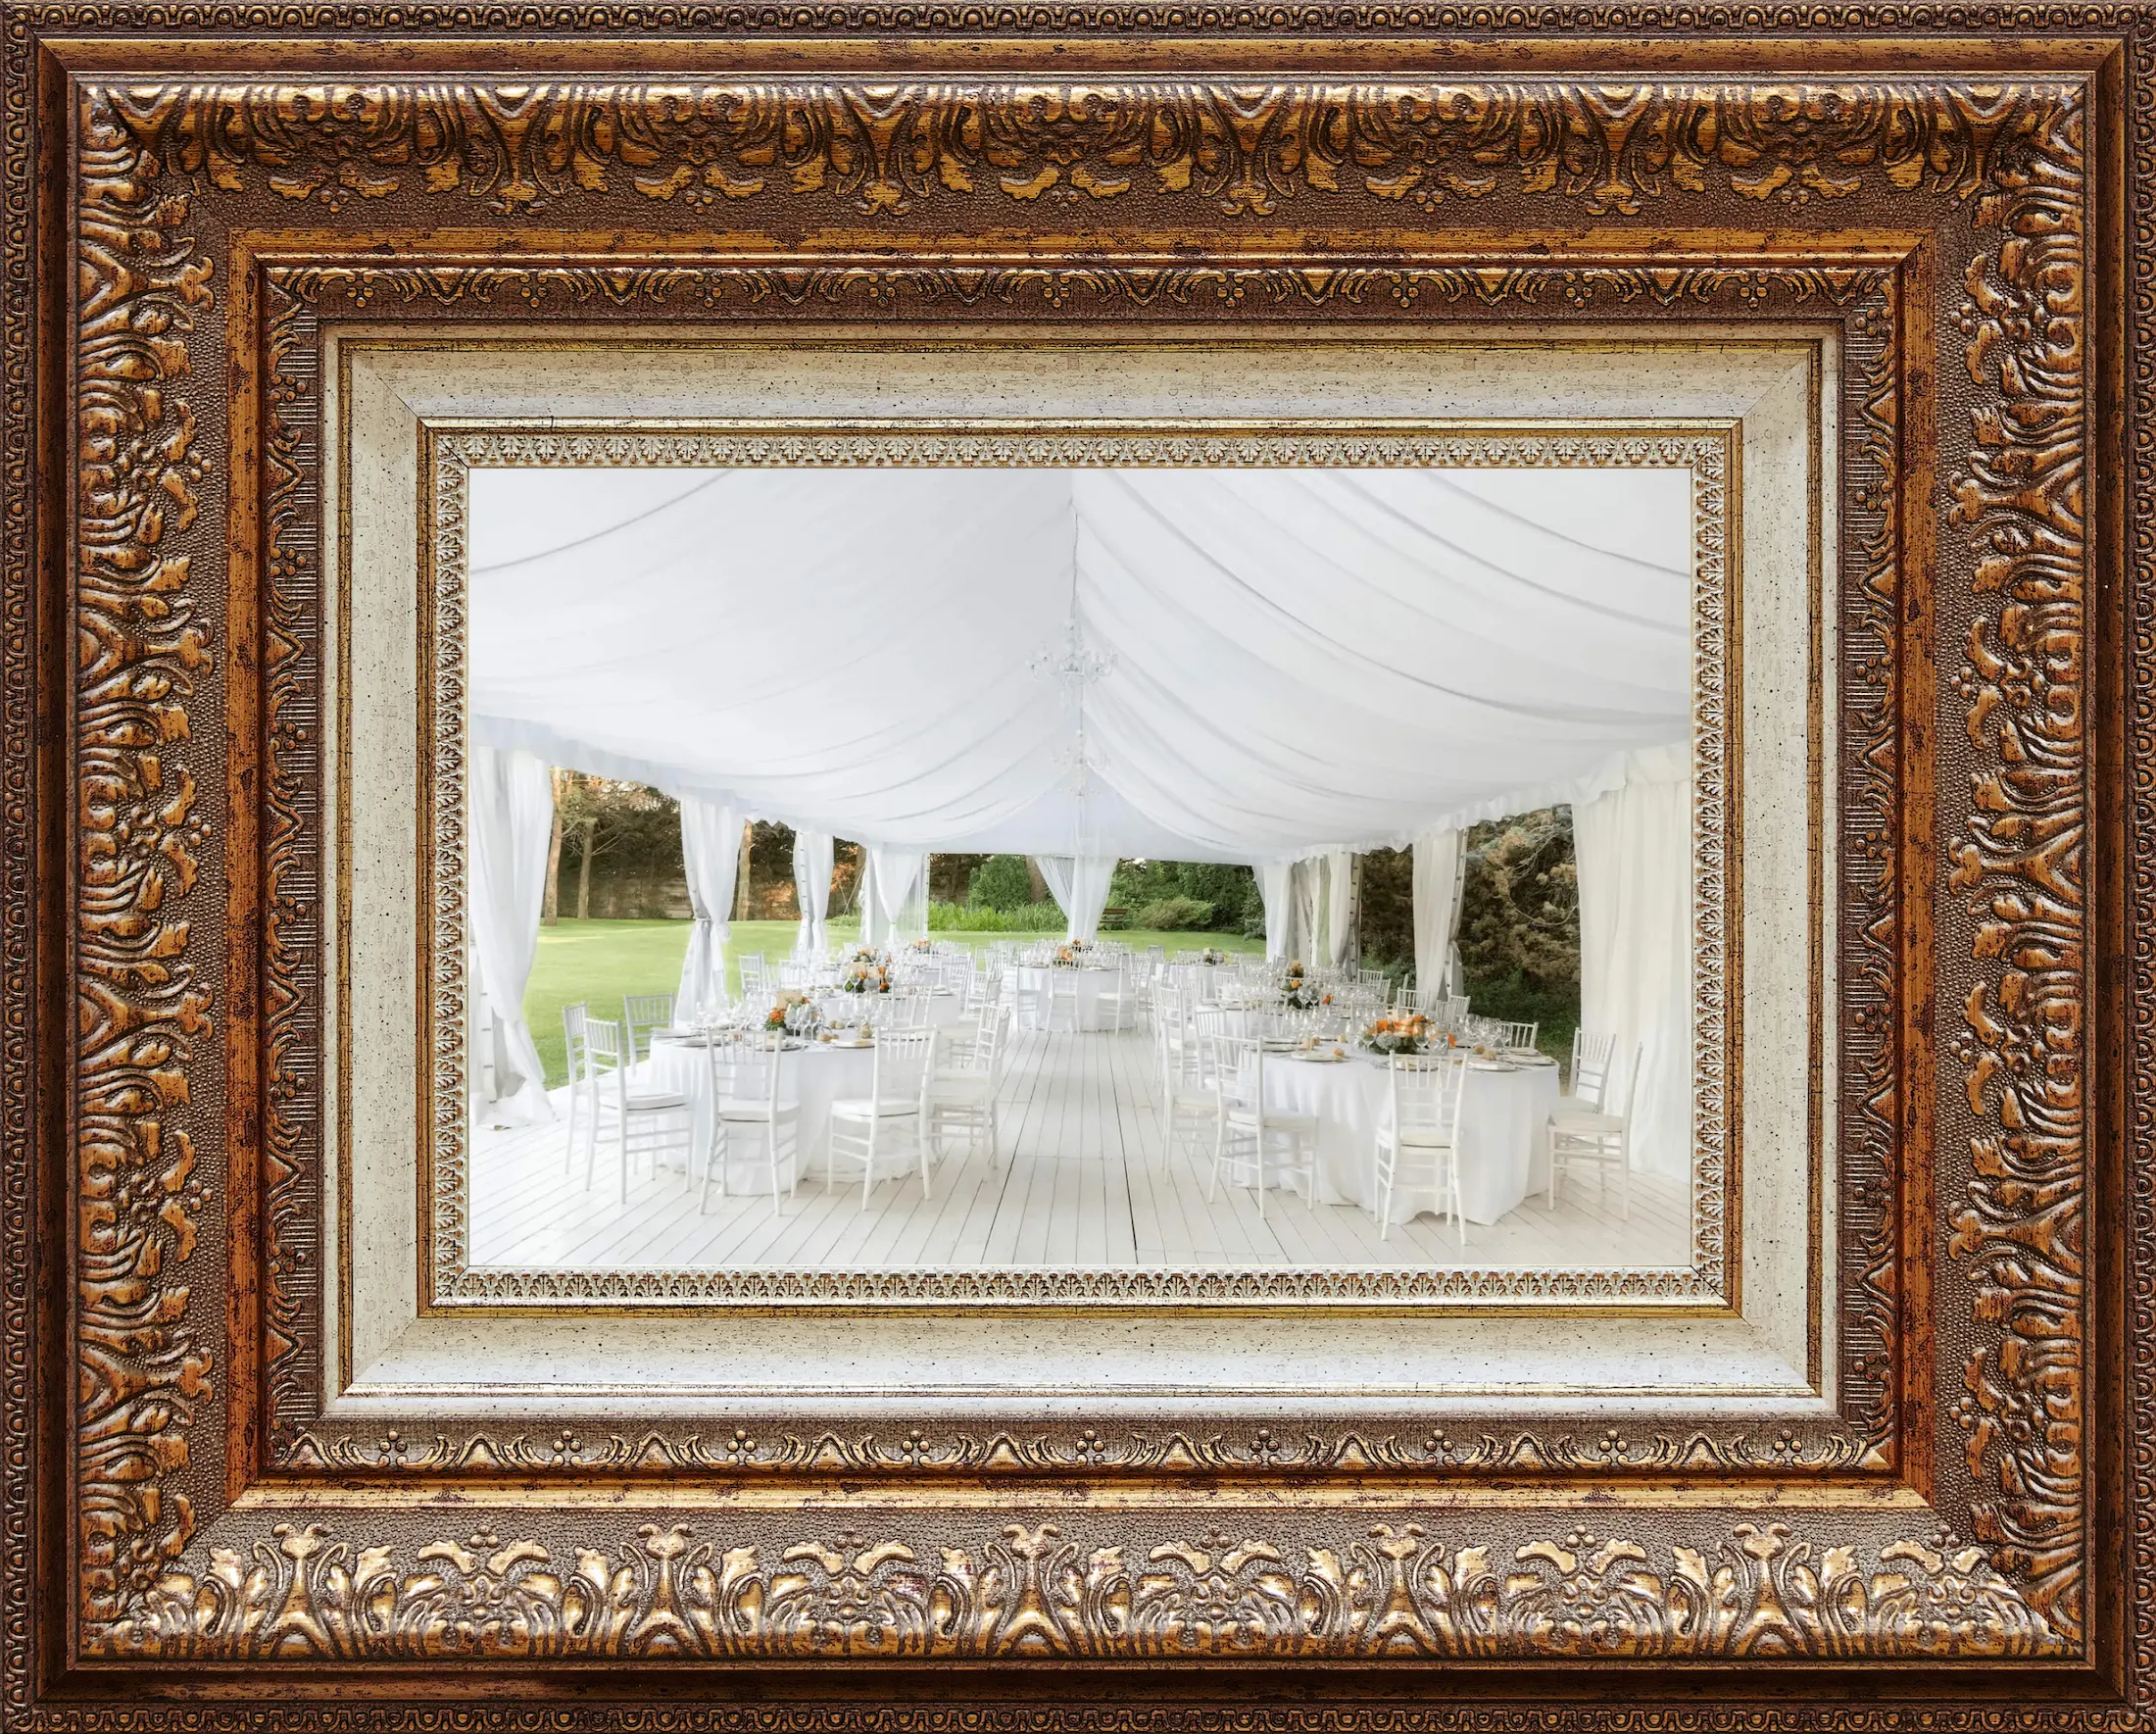 Image of an open marquee decorated in all white furniture and lining